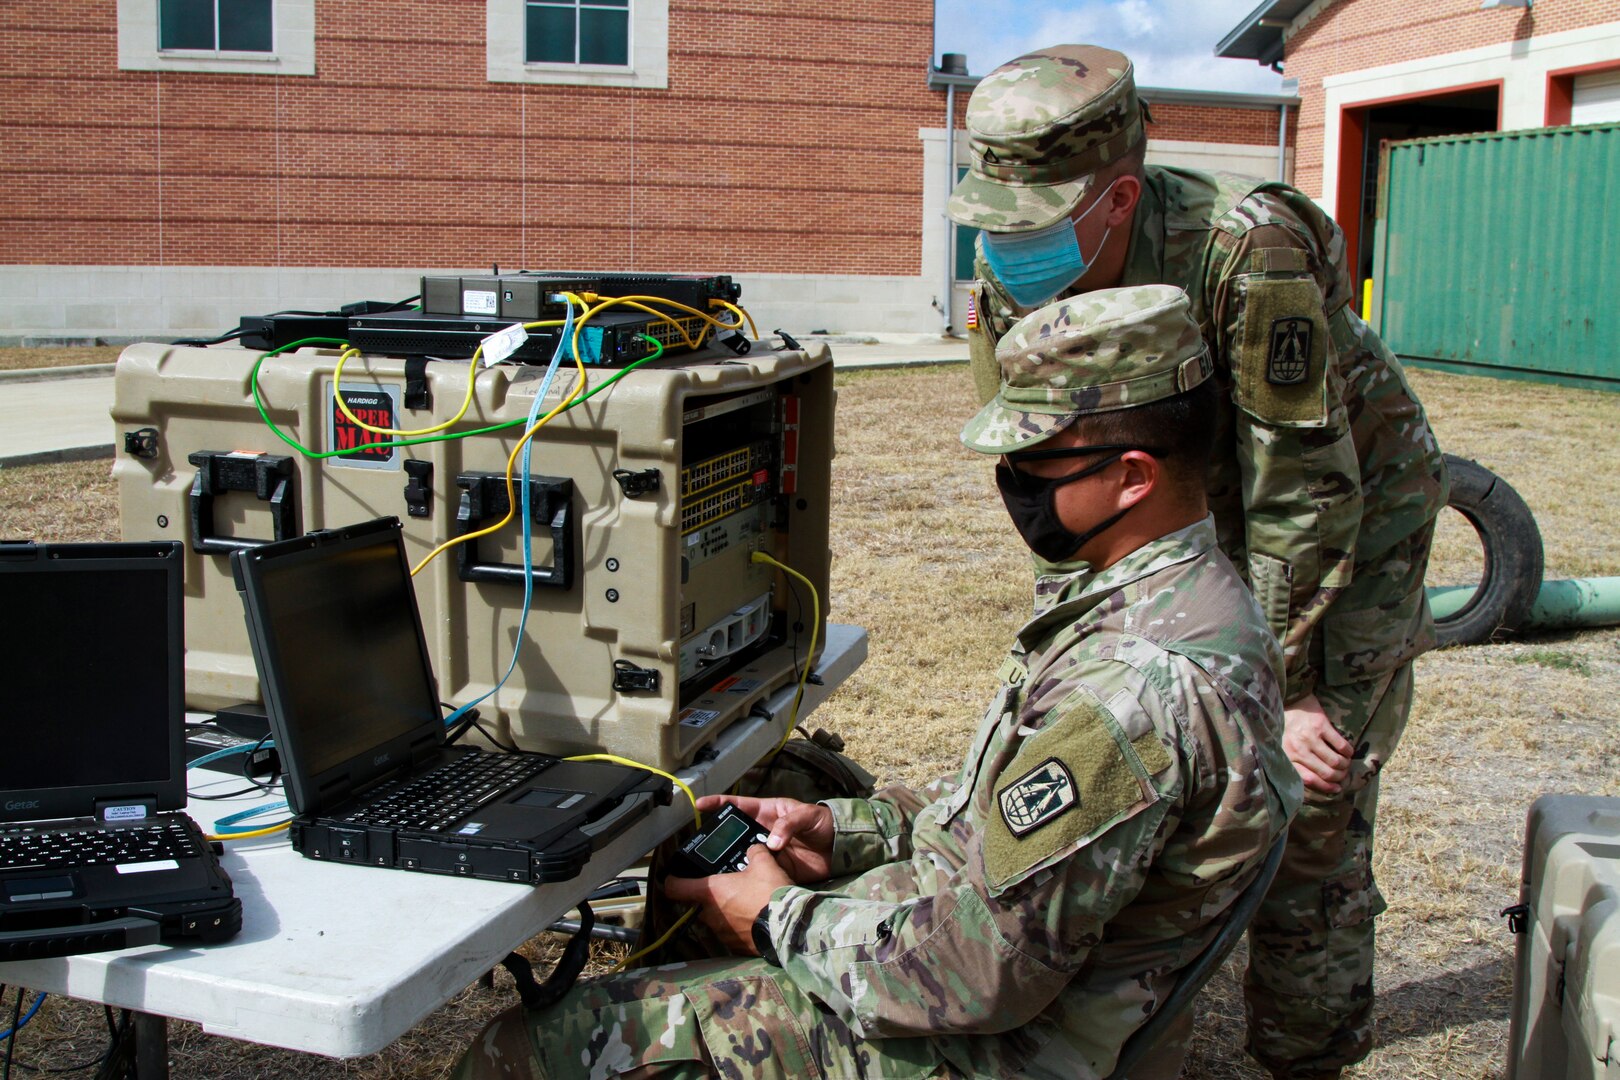 Spc. Martin Galvan, 62nd Expeditionary Signal Battalion multichannel transmission systems operator maintainer, runs a communications check, while Pfc. Nathaniel Davis, 62nd Expeditionary Signal Battalion multichannel transmission systems operator maintainer, observes during the Urban Search and Rescue lane at the San Antonio Fire Academy Nov. 6. This exercise helps assure readiness by ensuring units are interoperable and able to function as part of a cohesive national response.